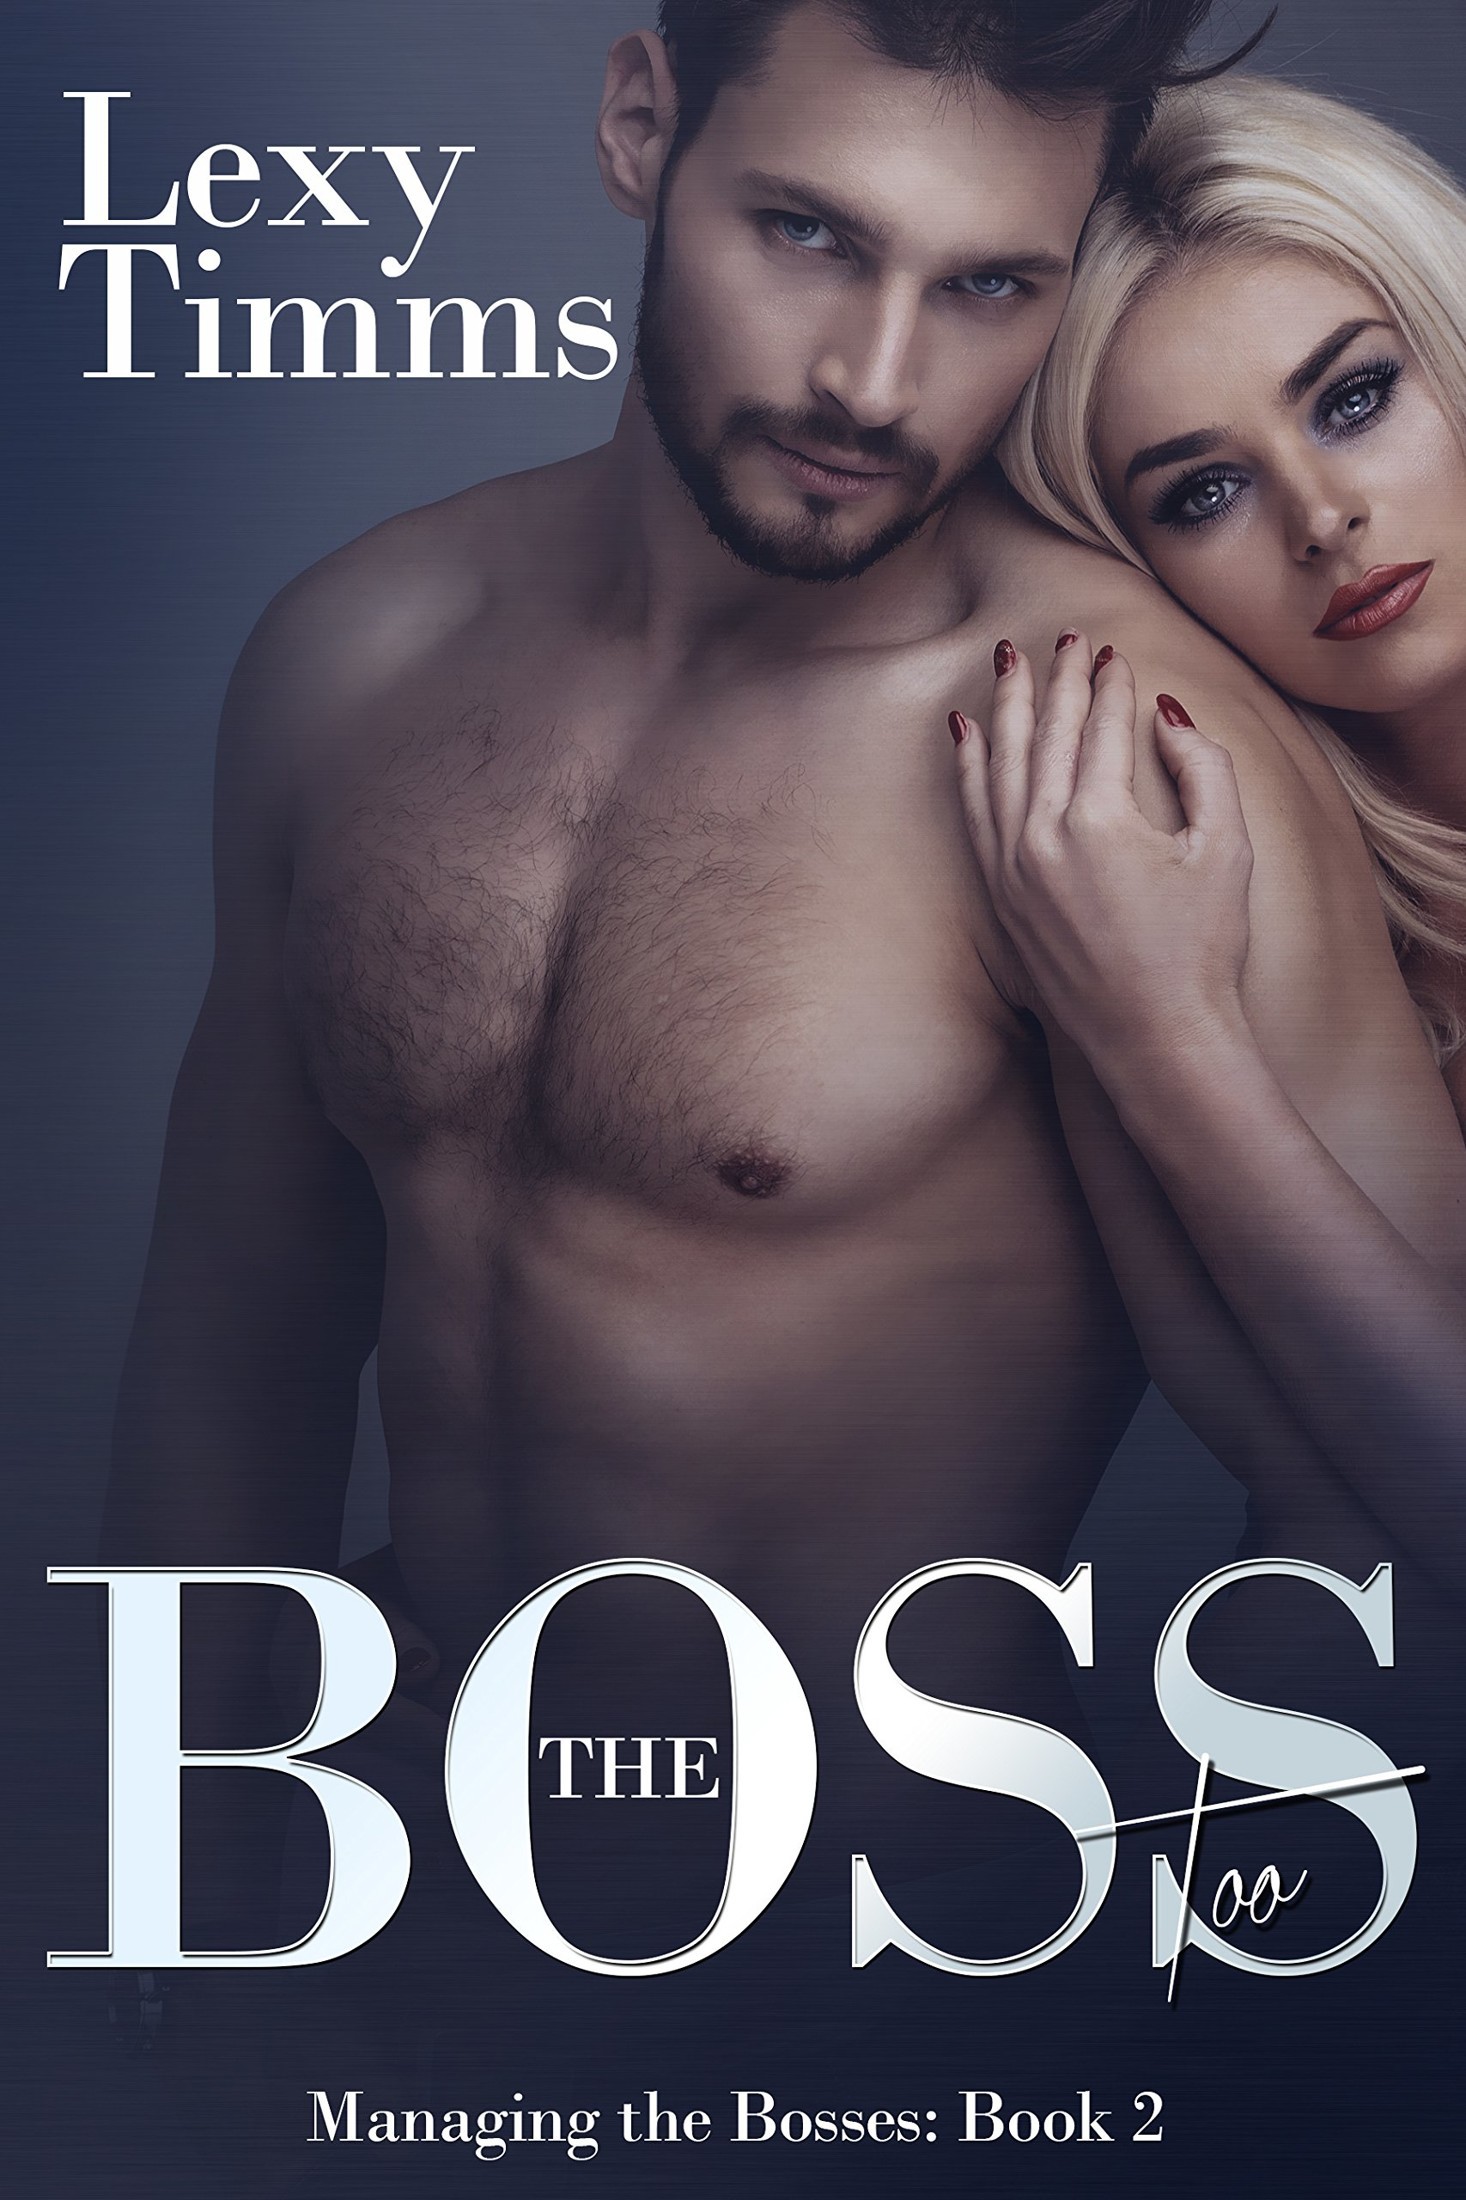 The Boss Too: Billionaire Romance by Lexy Timms